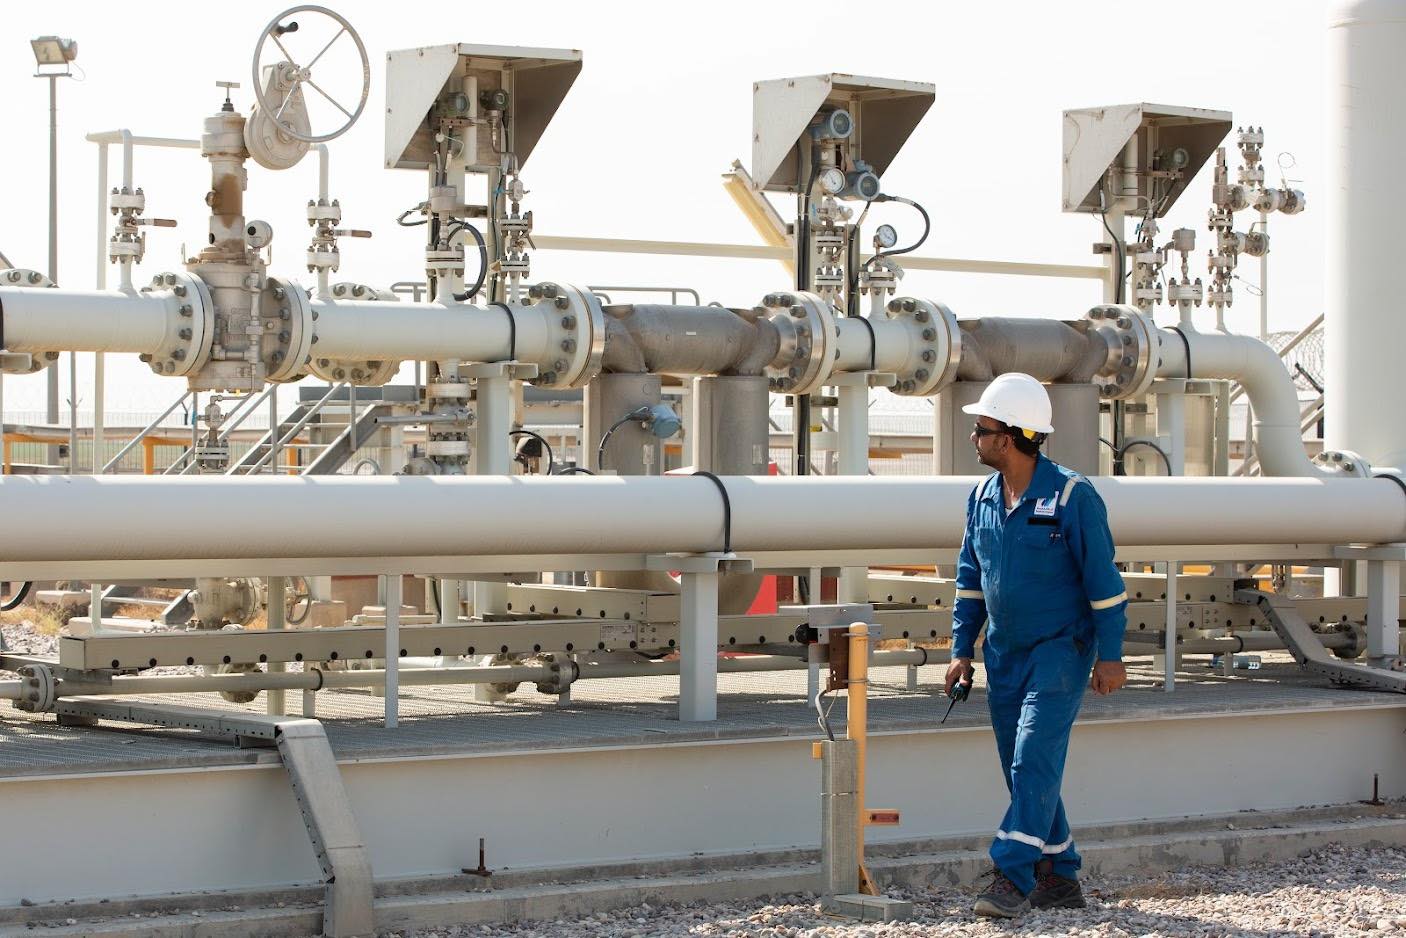 Minister of Oil expects to add 1,000 million cubic feet to Iraq's gas production rate